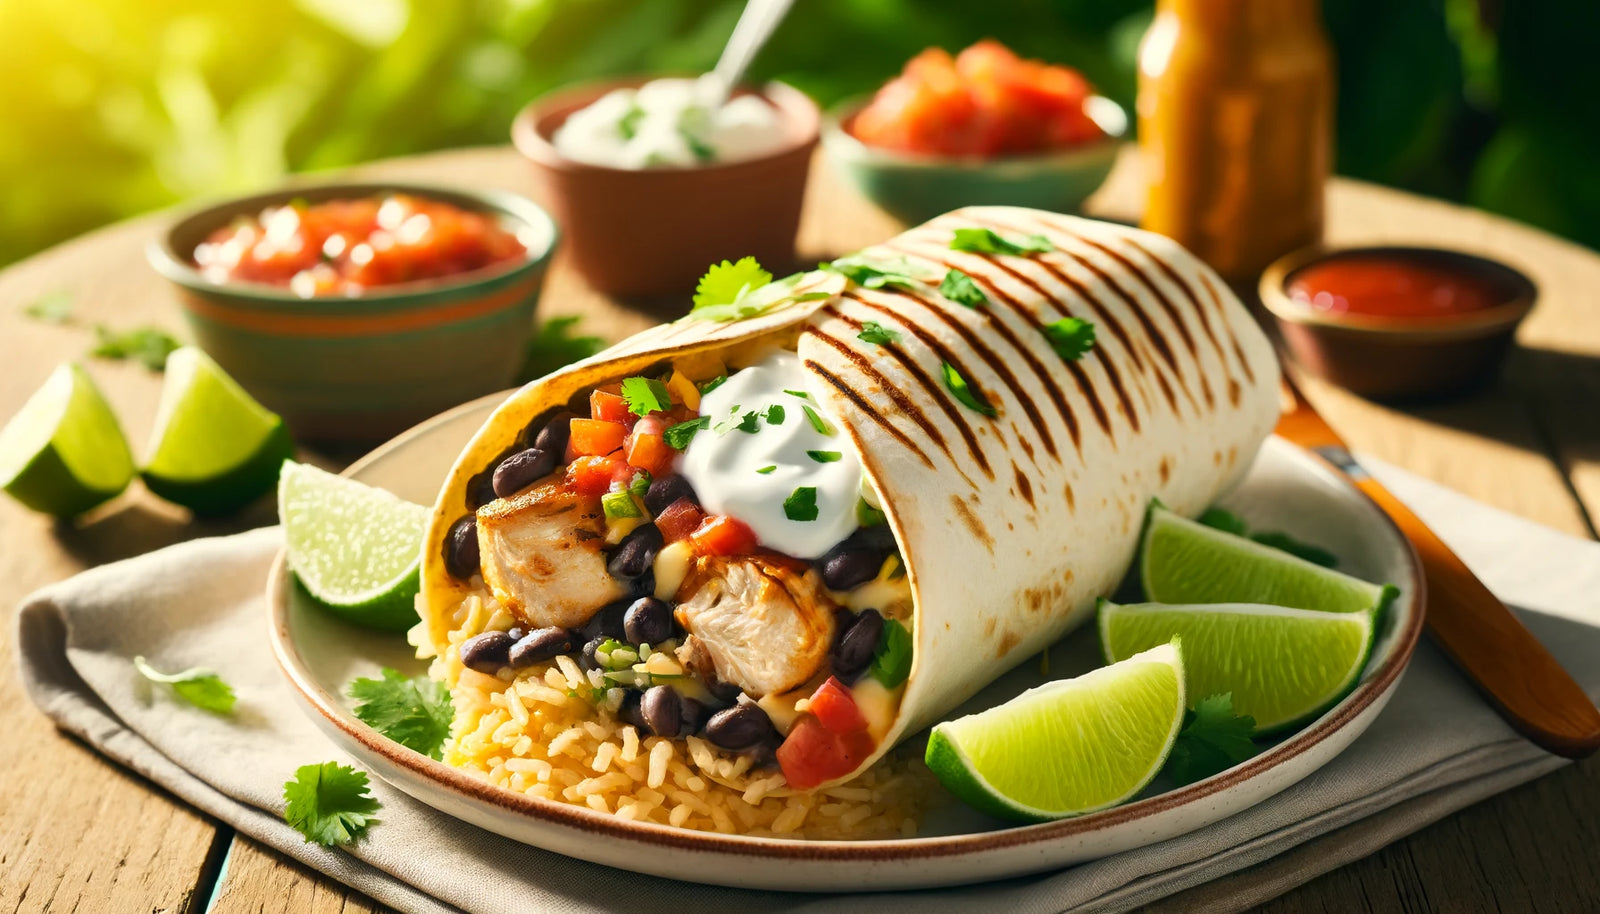 Grilled Chicken Burrito Recipe on the Arteflame Grill